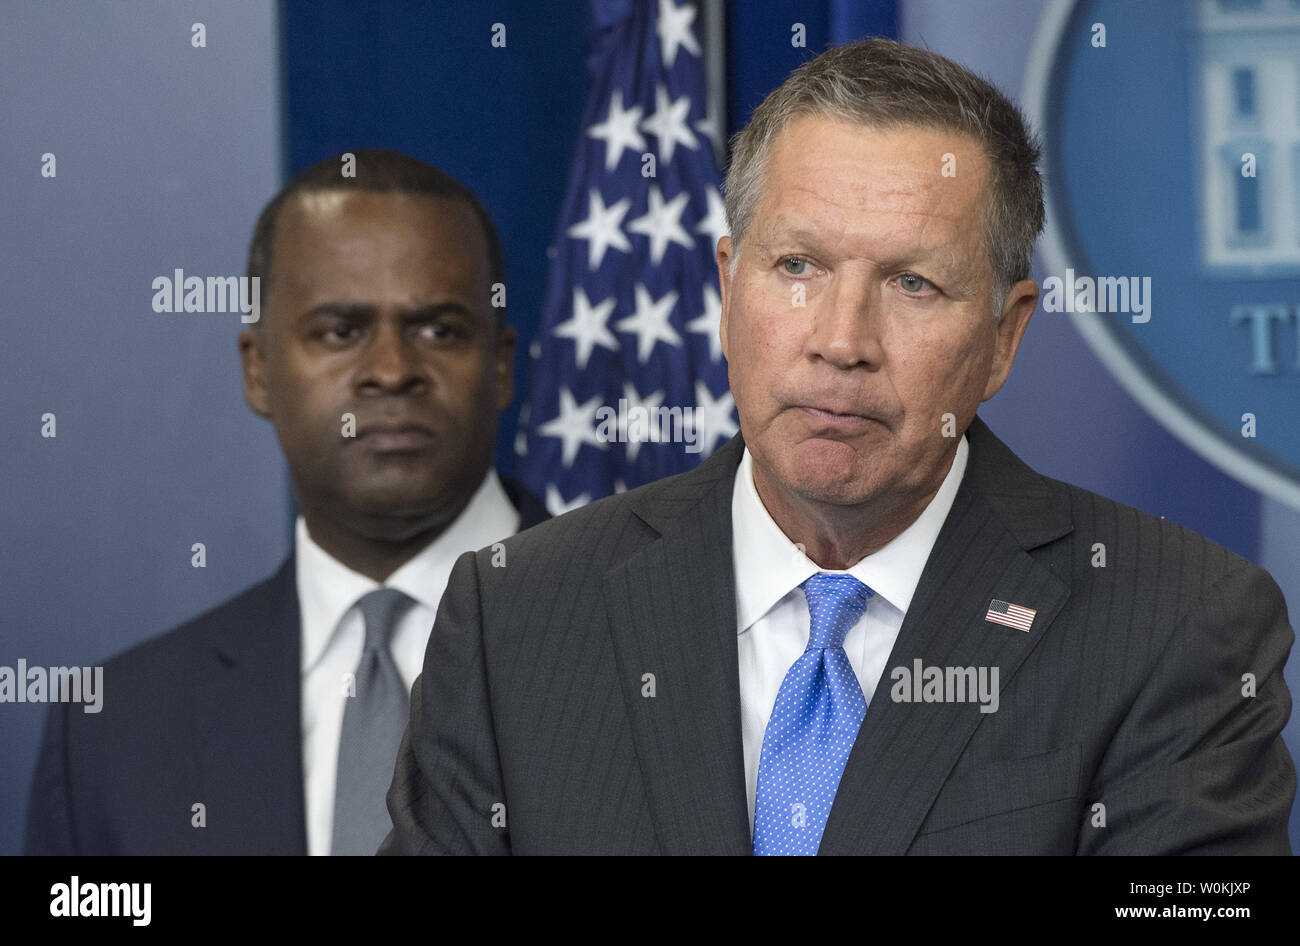 Ohio Governor John Kasich, joined by Atlanta Mayor Kasim Reed, speaks to the press on the Trans-Pacific Partnership following a meeting with President Barack Obama at the White House in Washington, D.C. on September 16, 2016. Photo by Kevin Dietsch/UPI Stock Photo